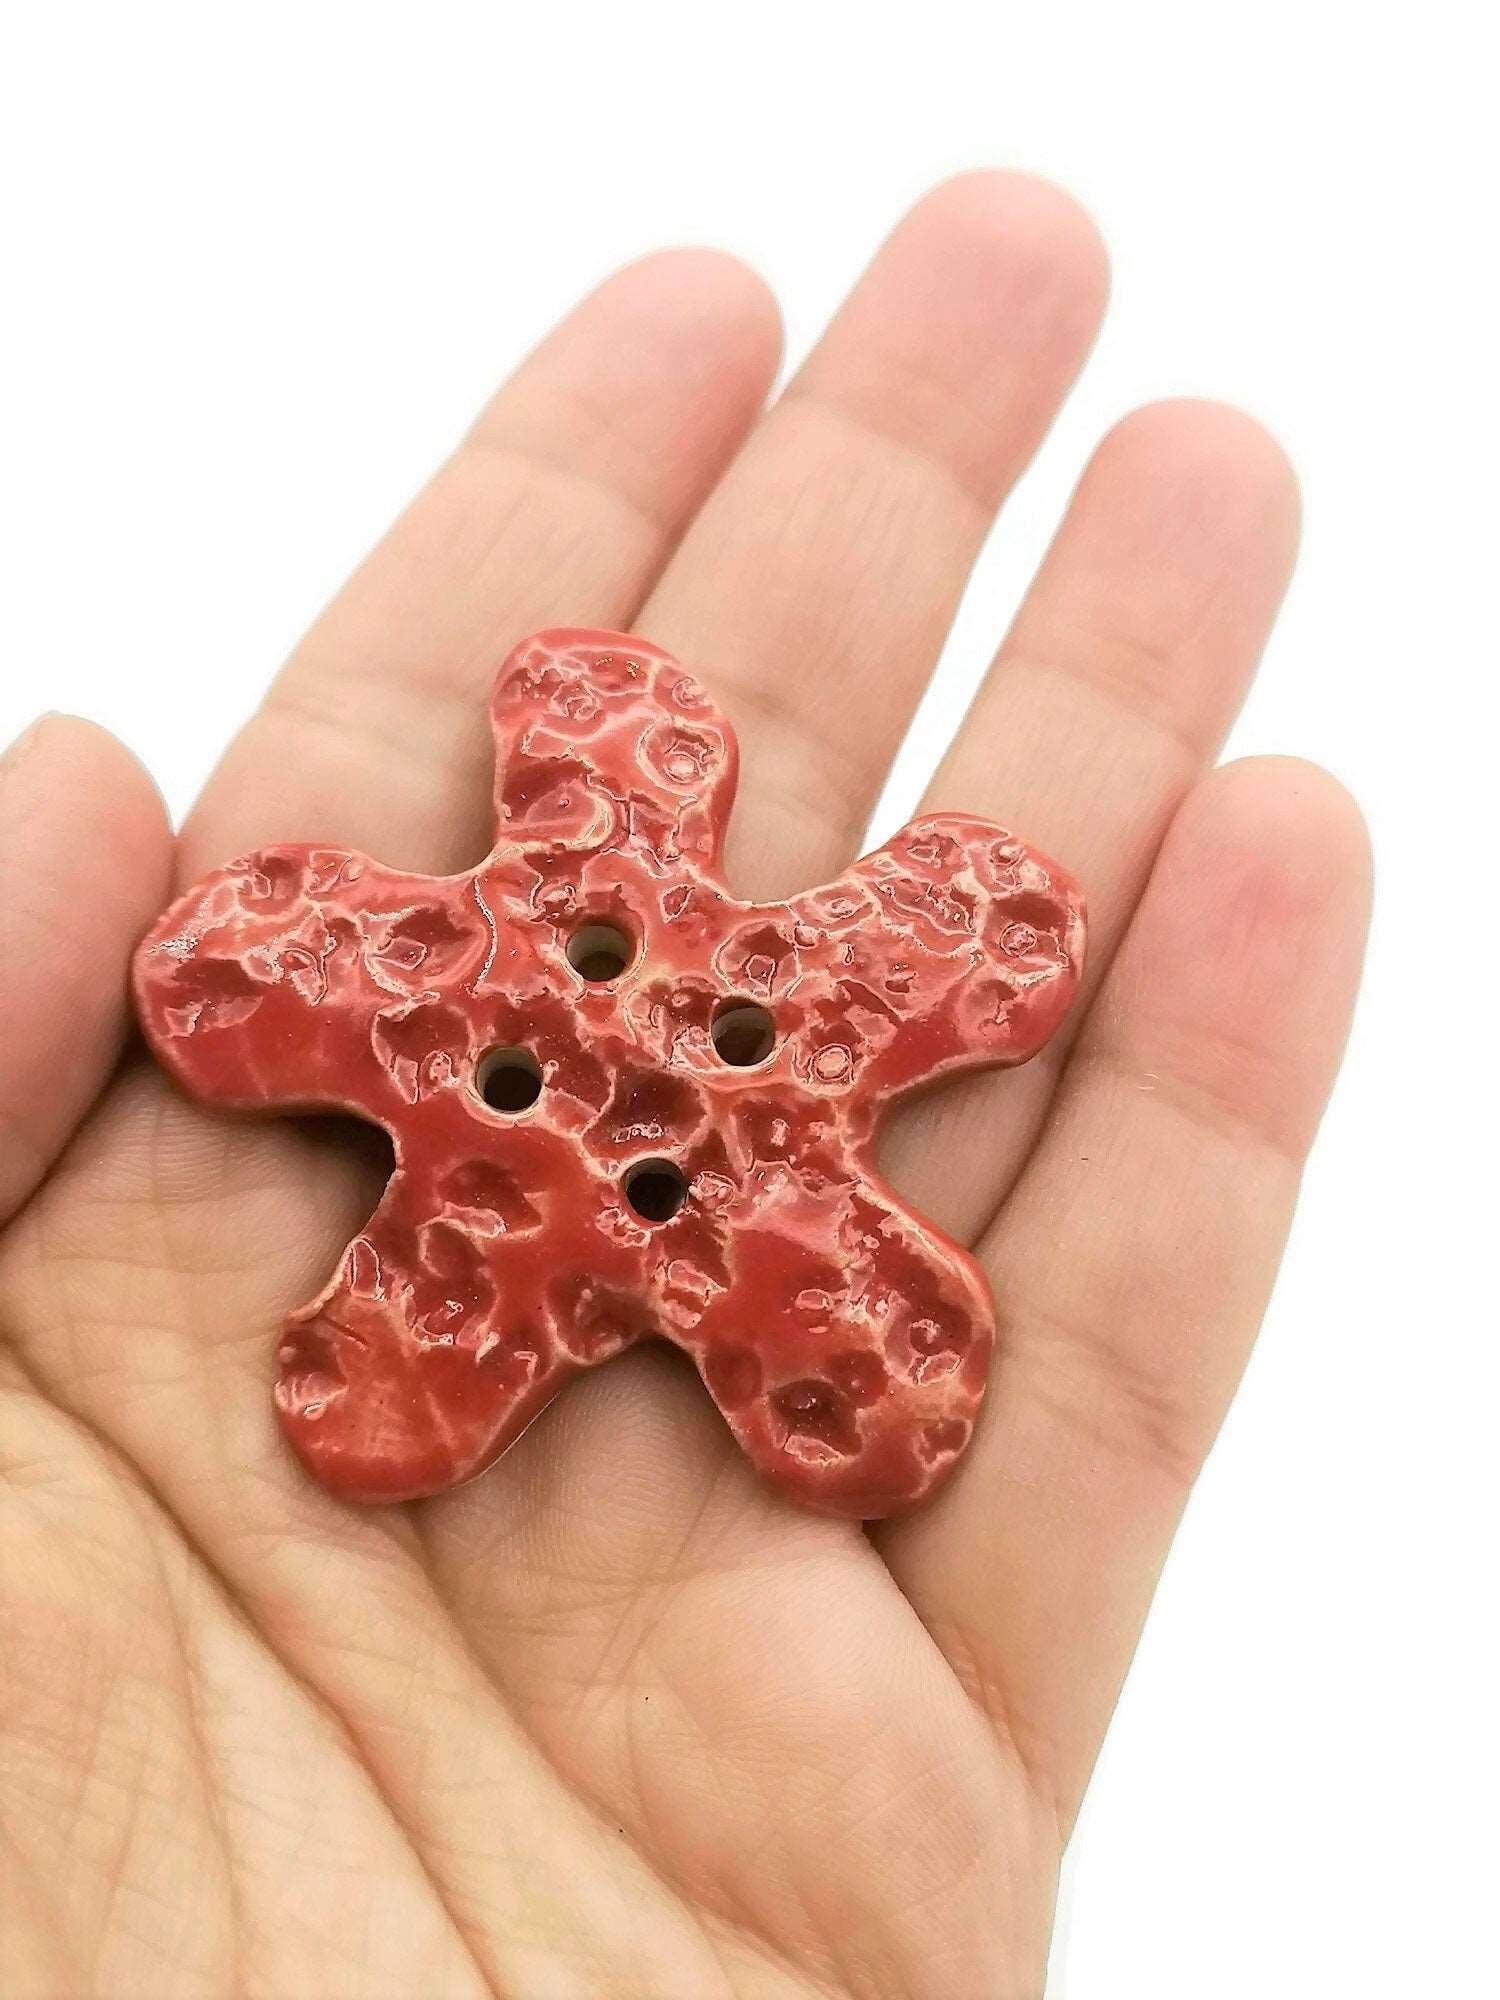 1Pc 50 mm Red Handmade Ceramic Star Extra Large Sewing Buttons